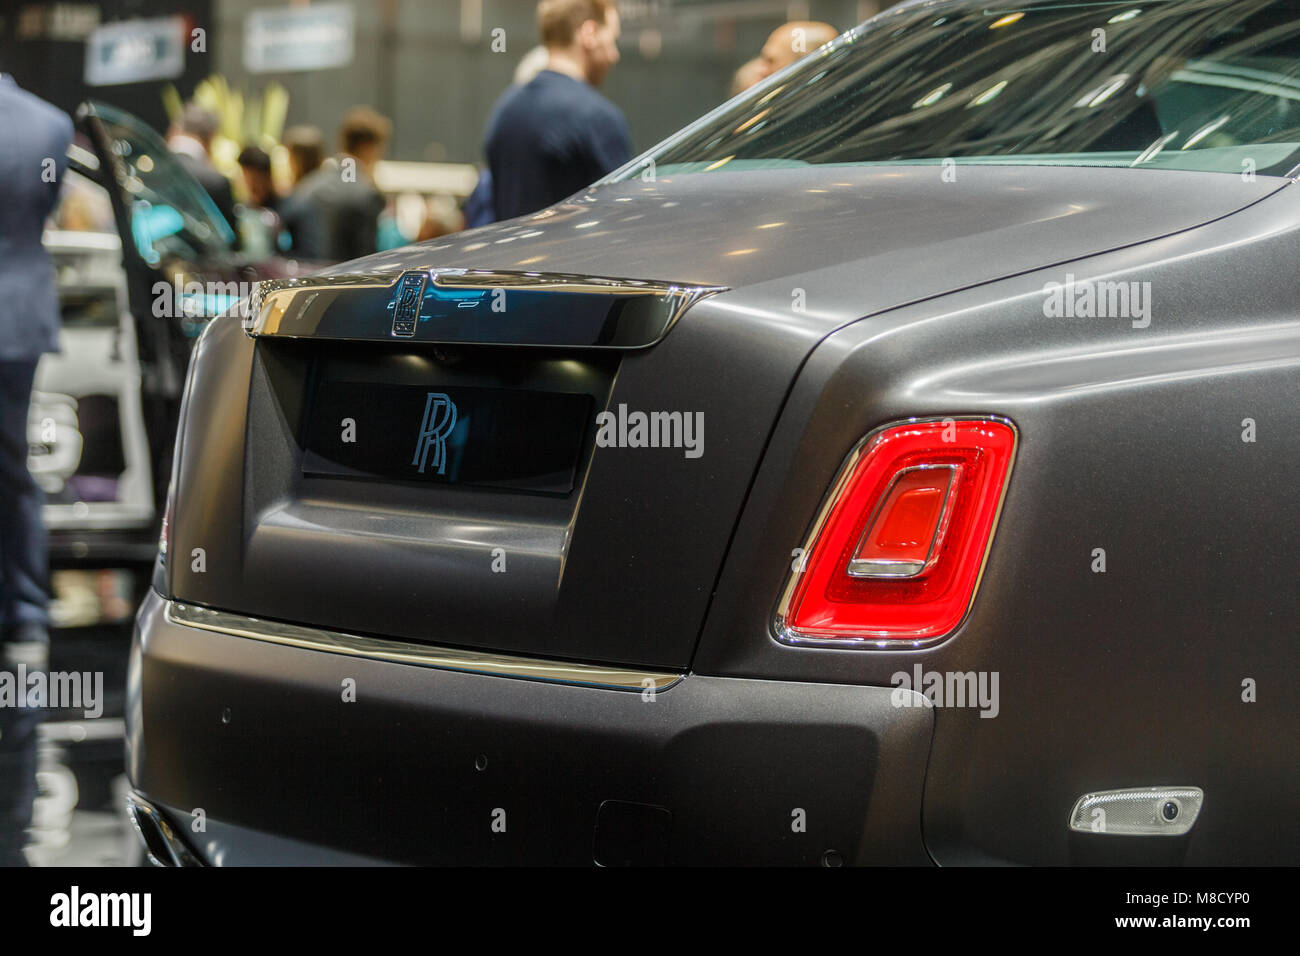 The Phantom 8 which is the brand Rolls-Royce gray color 4 doors presented  at the Geneva Motor Show in Switzerland in 2018 Stock Photo - Alamy